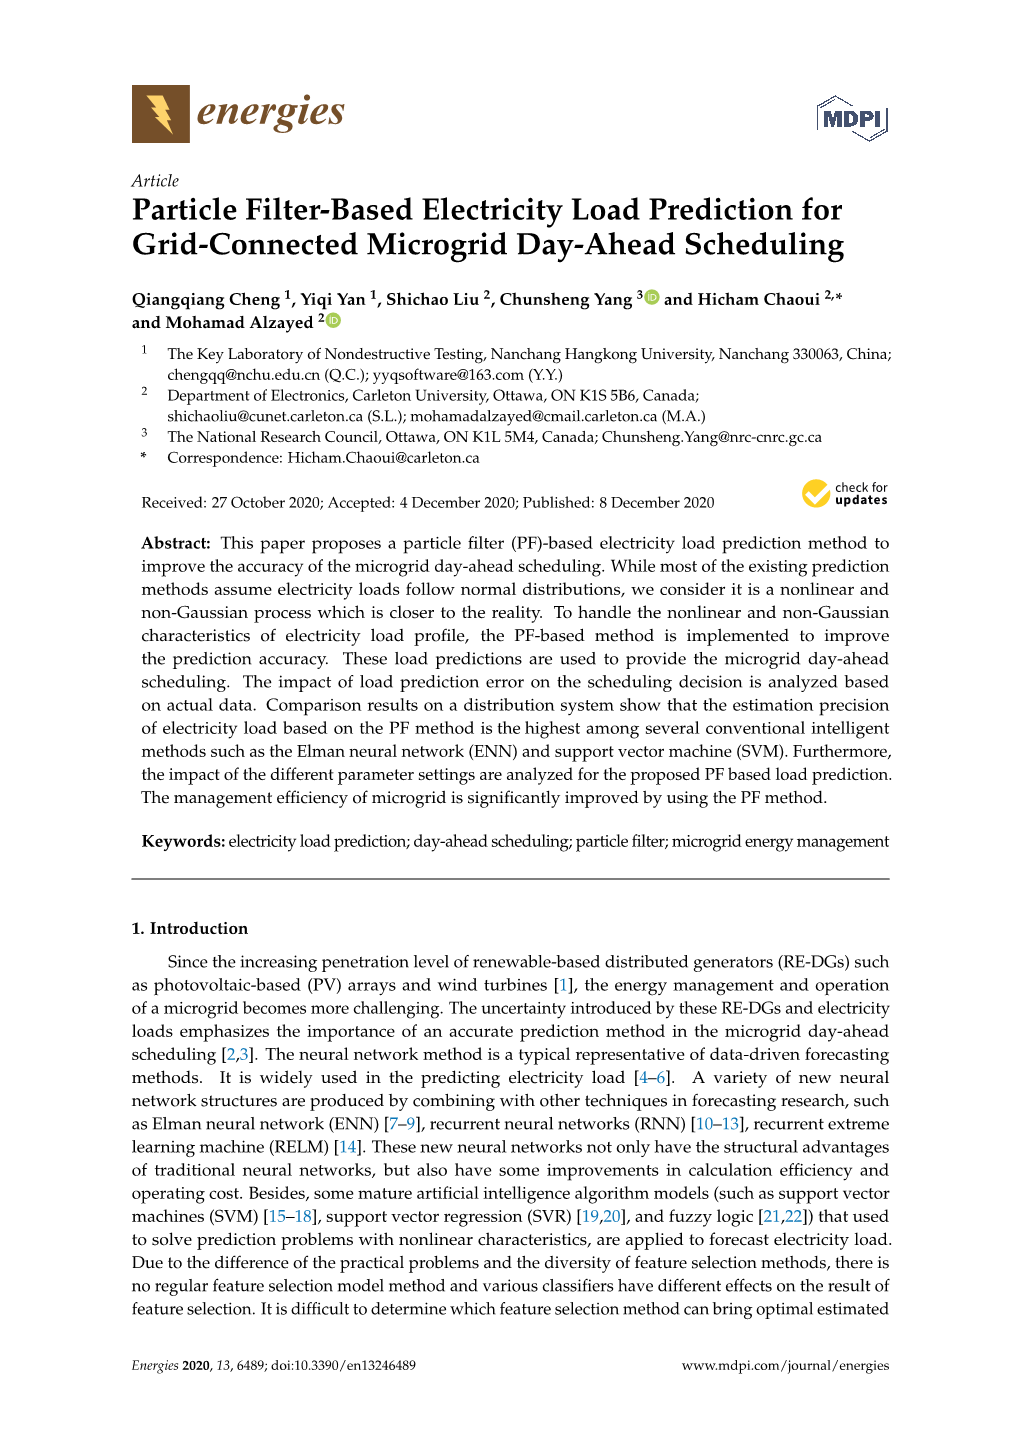 Particle Filter-Based Electricity Load Prediction for Grid-Connected Microgrid Day-Ahead Scheduling